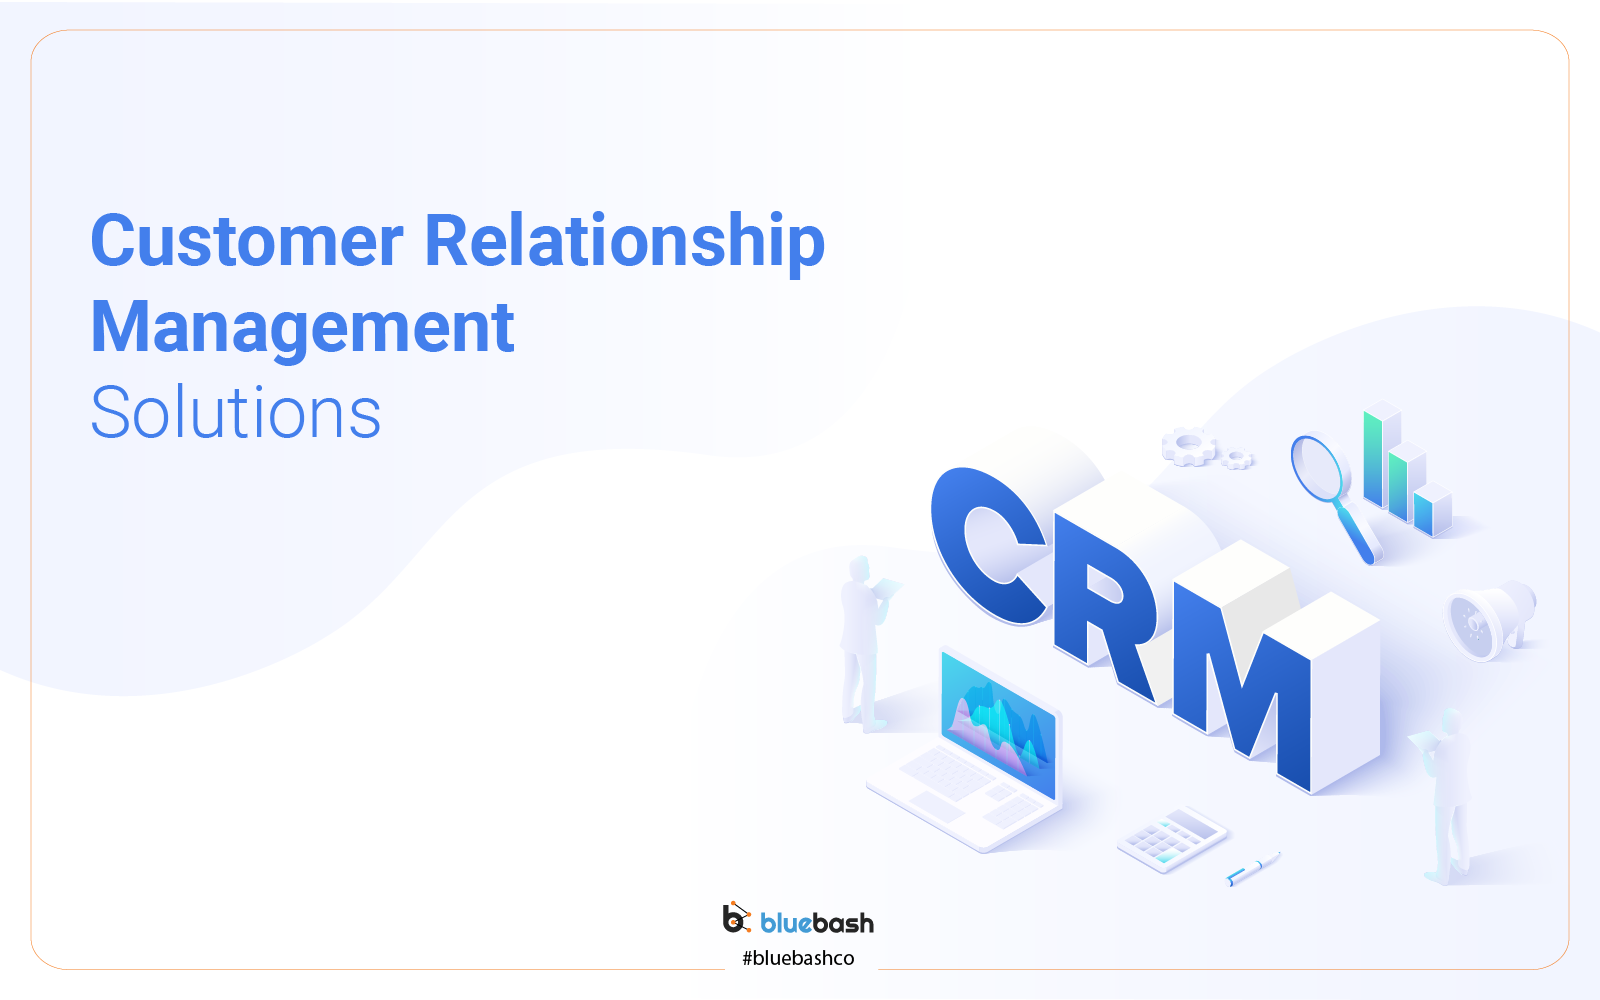 CRM Management Tools: The Best Choice for Your Business?